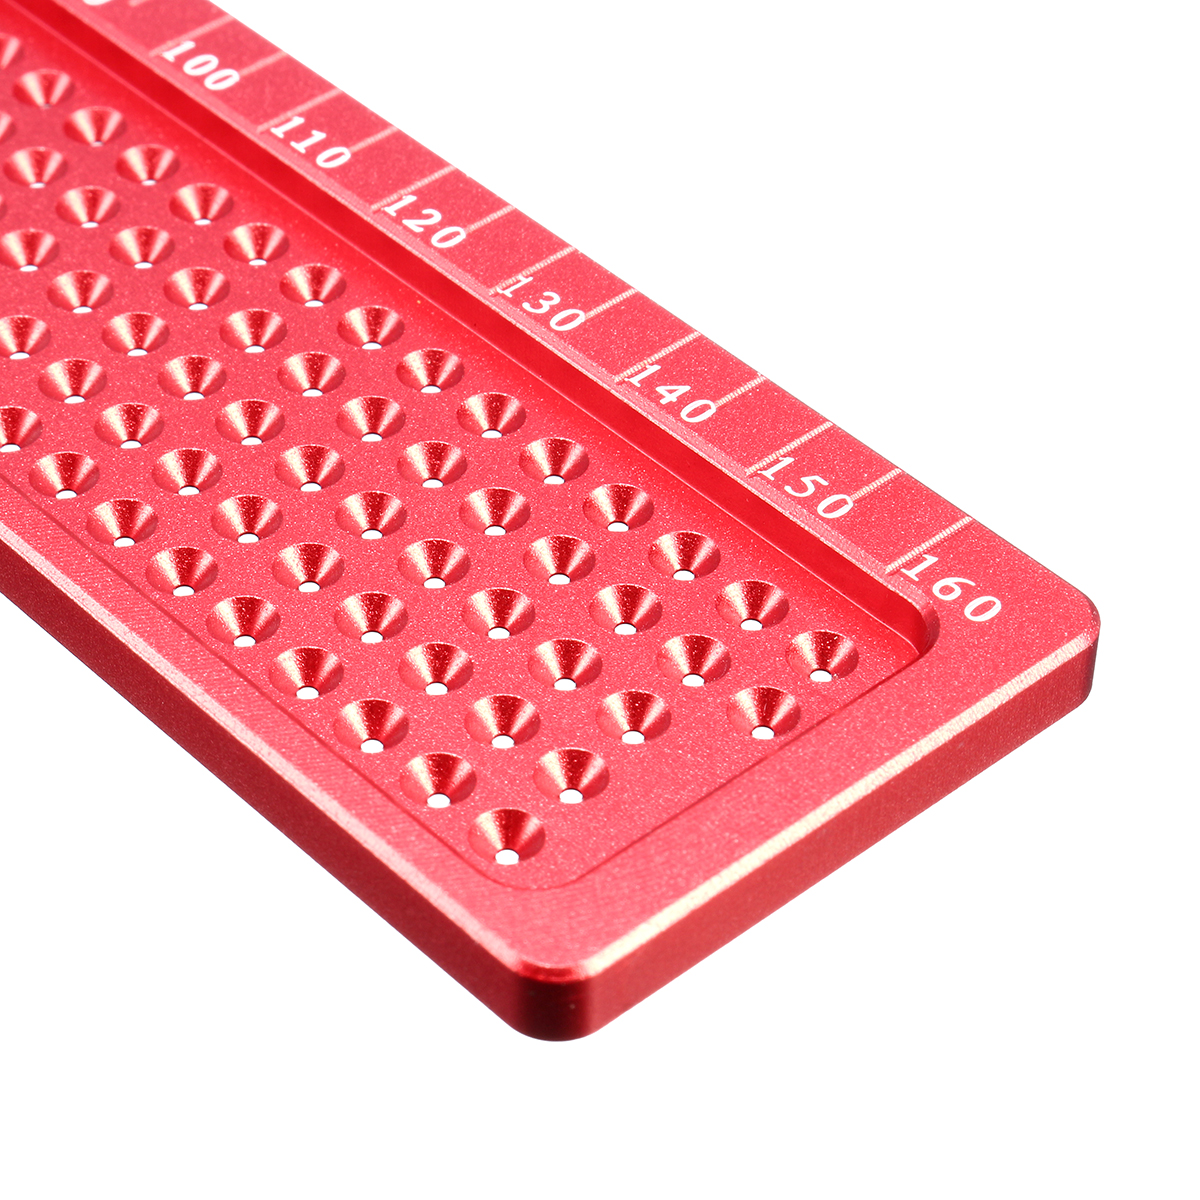 Drillpro-Aluminium-Alloy-T-160-Hole-Positioning-Metric-Measuring-Ruler-Woodworking-Precision-Marking-1324492-7